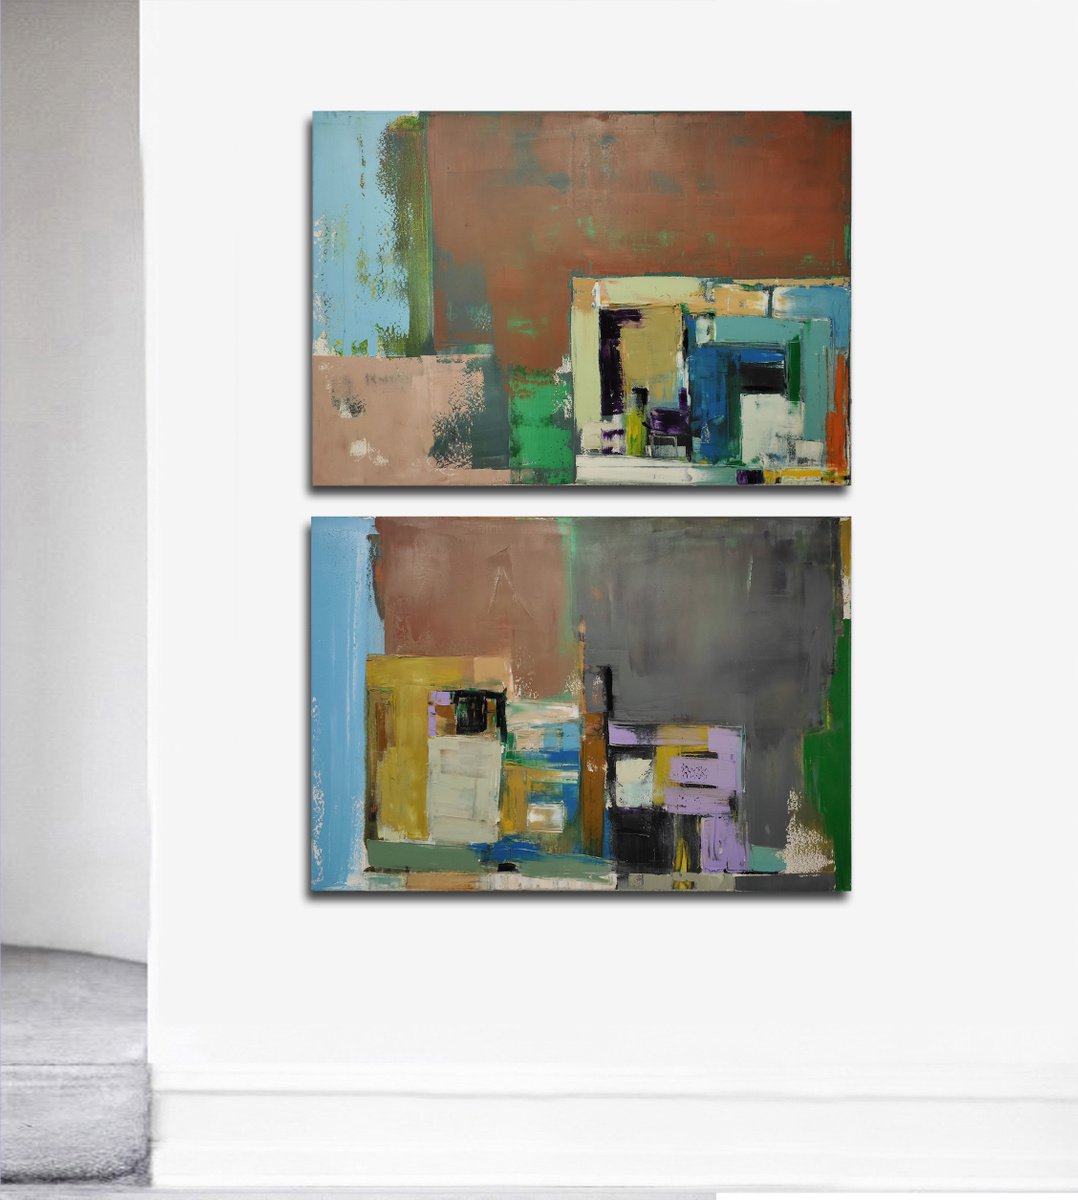 Oil painting, canvas art, stretched, diptych Layer city 46. Size 2x (39.4 x 27.5 inches... by Kariko ono